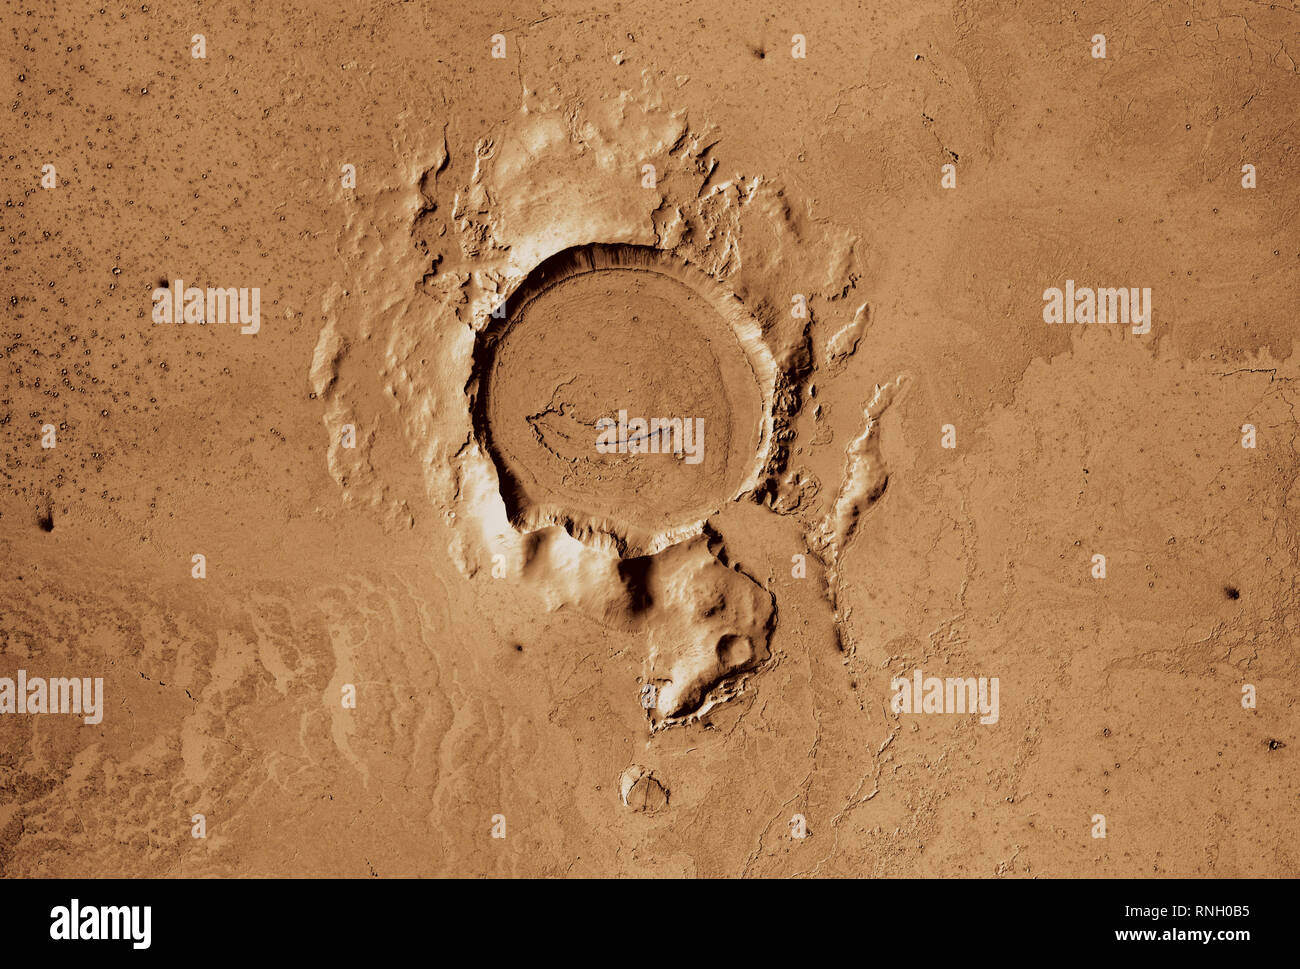 View of the planet Mars surface showing an Elysium Planitia crater Stock Photo